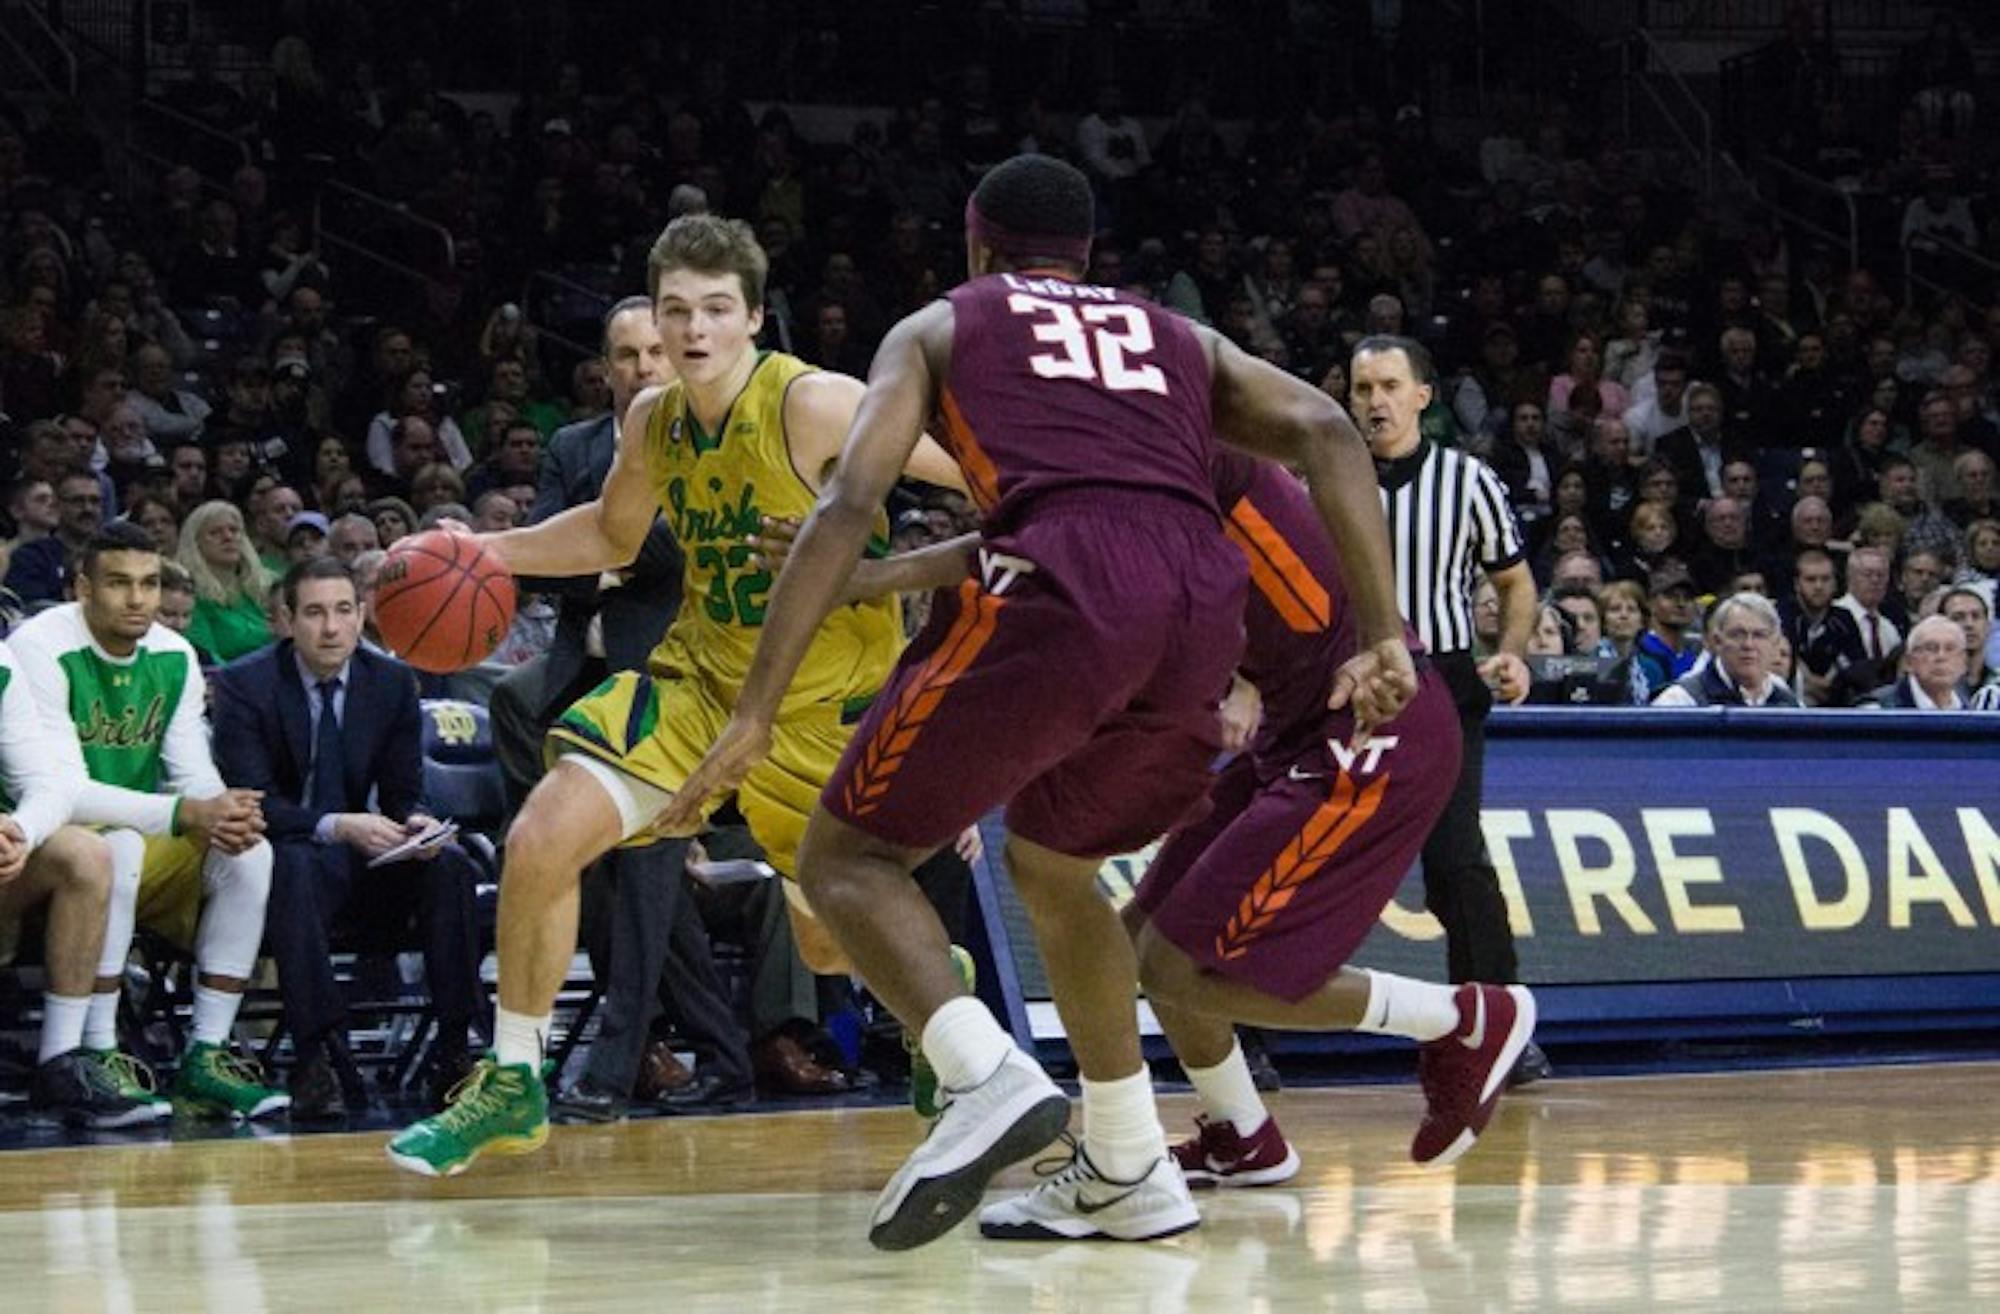 Irish junior guard Steve Vasturia looks to maneuver around two Virginia Tech defenders during Notre Dame’s 83-81 victory on Wednesday at Purcell Pavilion. Vasturia filled in at point guard and scored 16 points Saturday after junior guard Demetrius Jackson left with an injury.